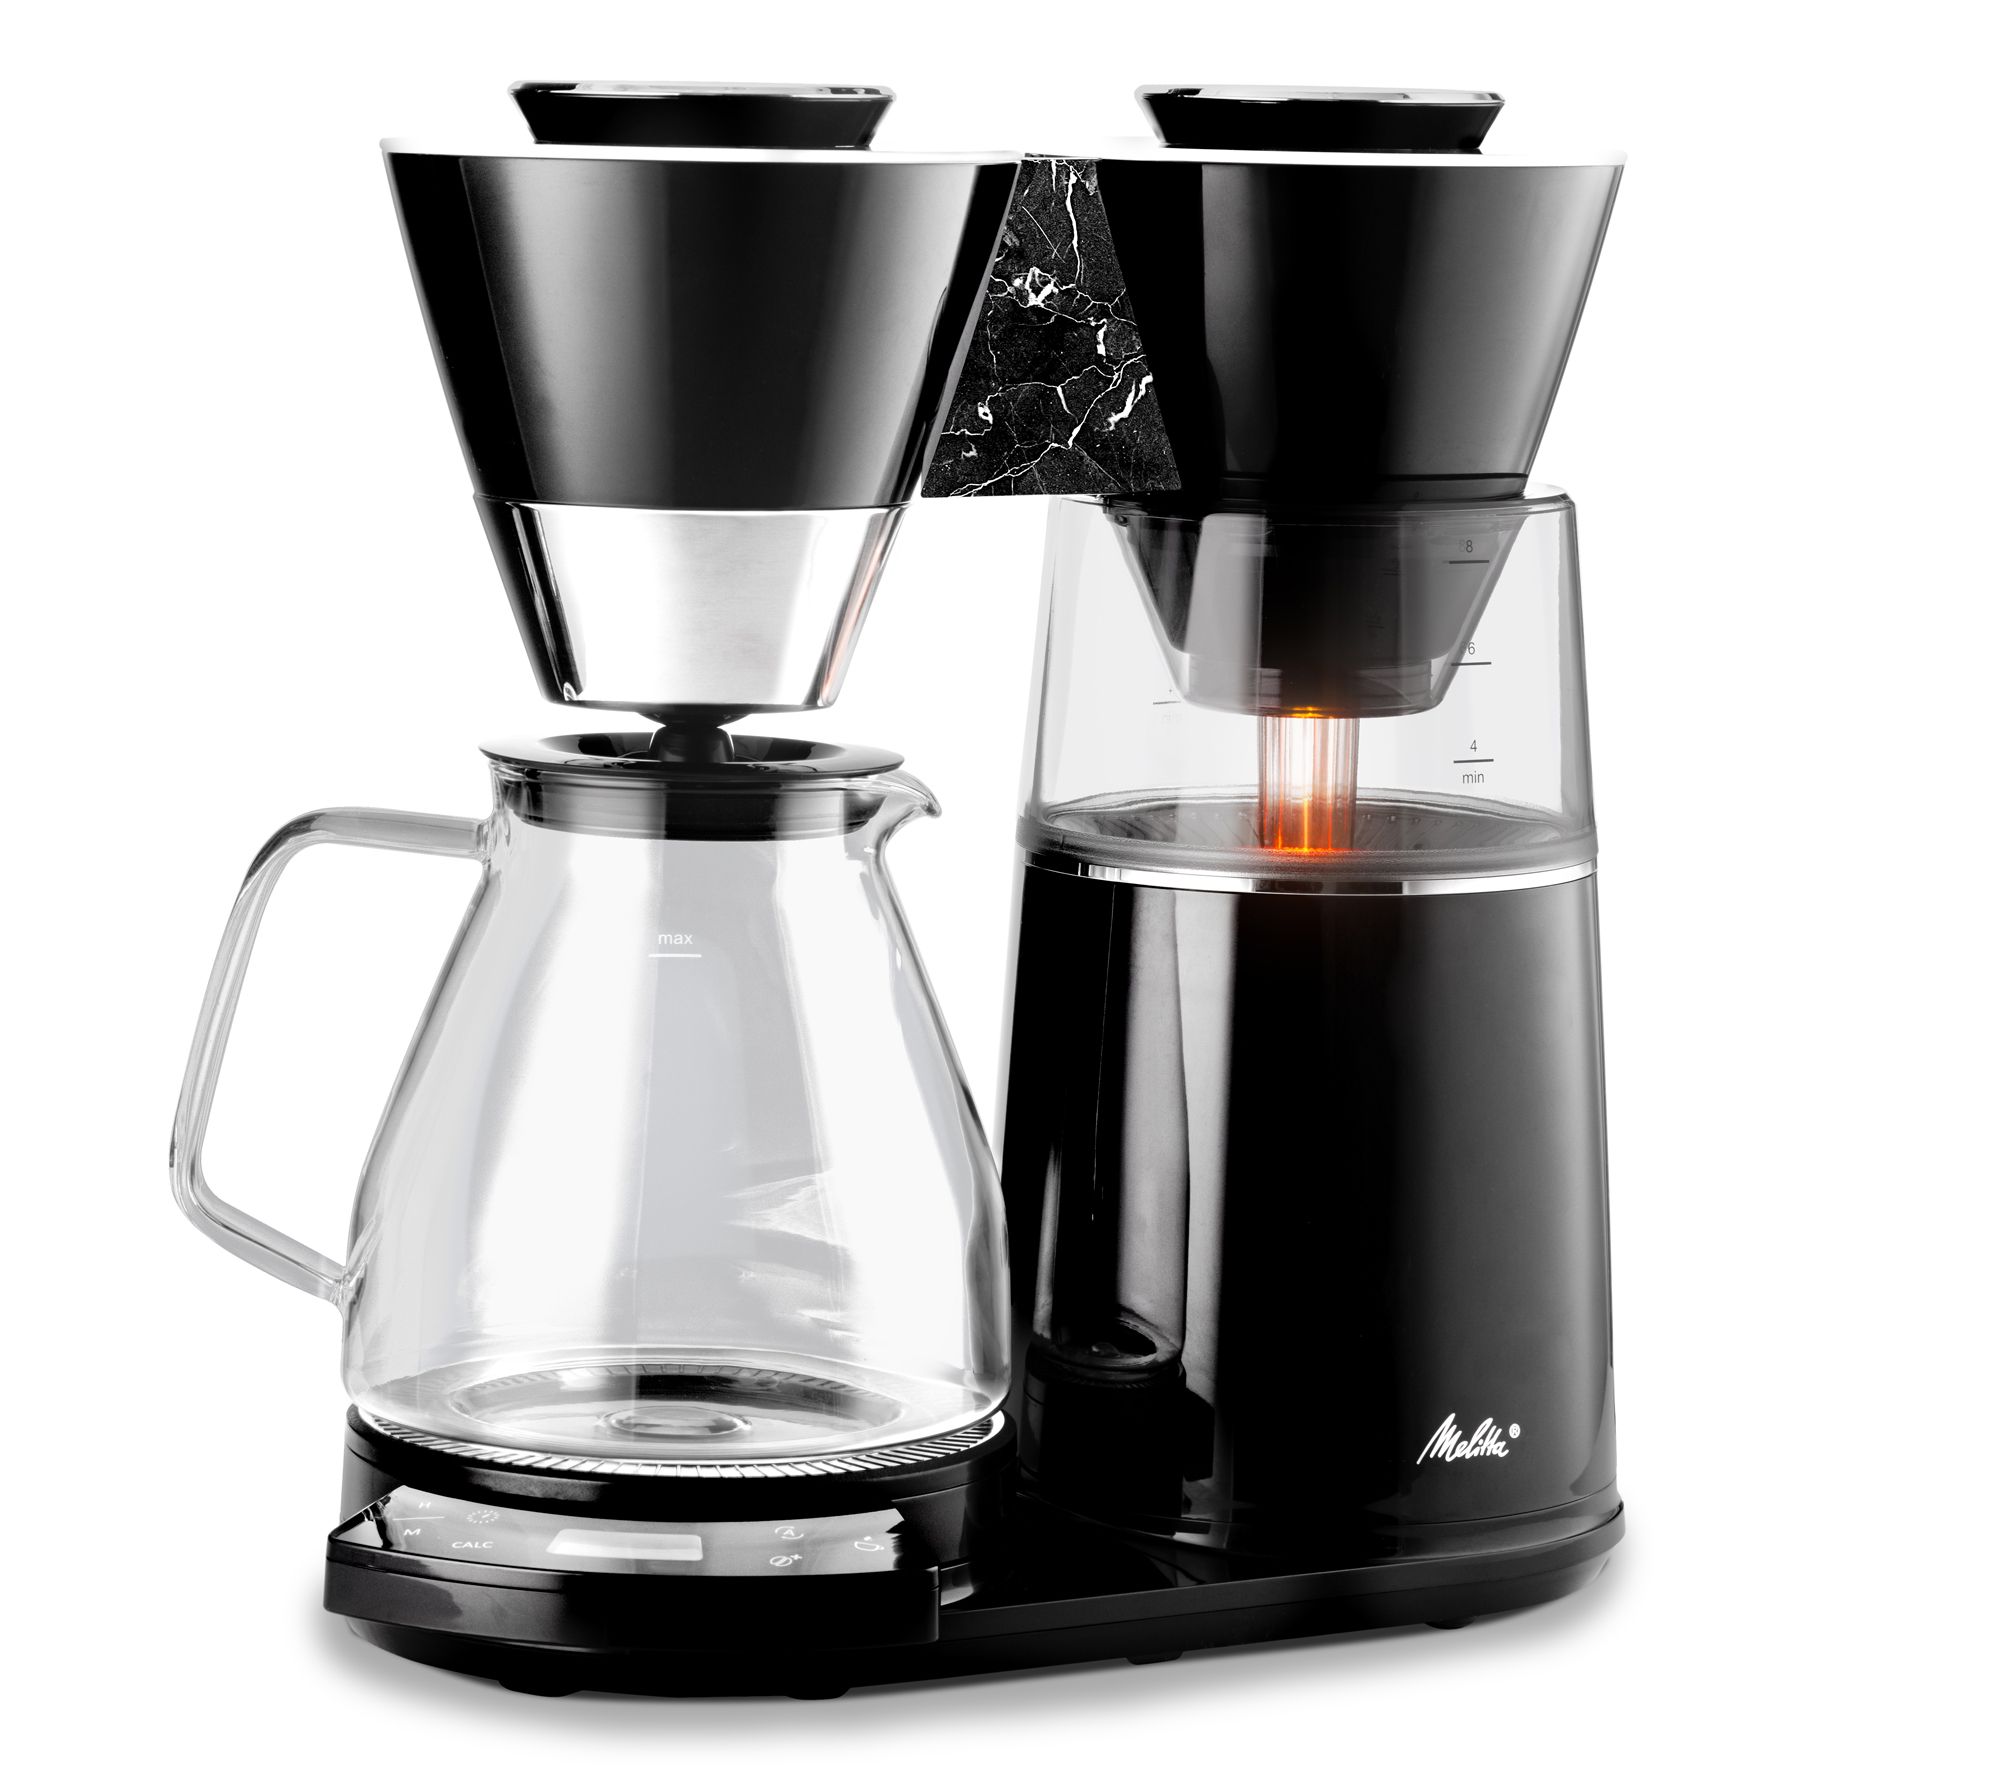 Melitta Vision White 12-Cup Drip Coffee Maker + Reviews